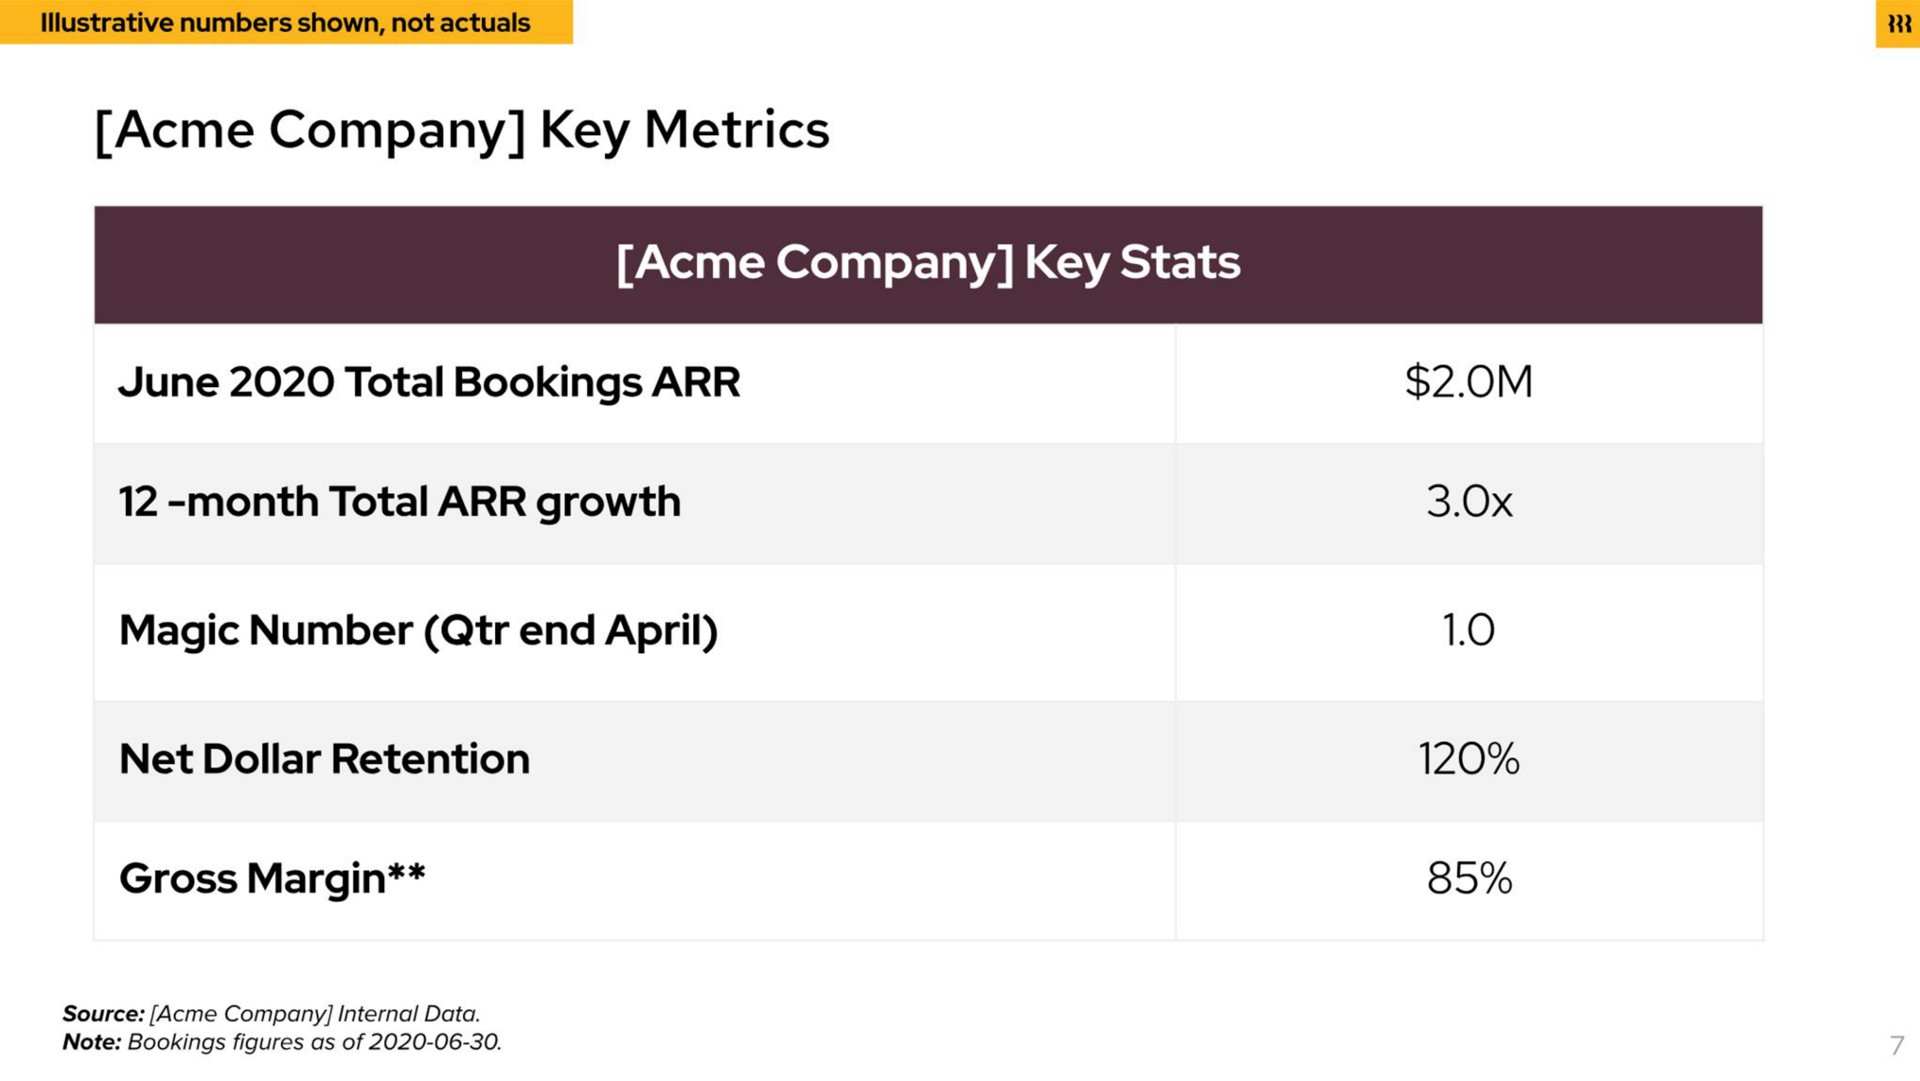 acme company key metrics acme company key june total bookings month total growth magic number end net dollar retention gross margin | Rippling